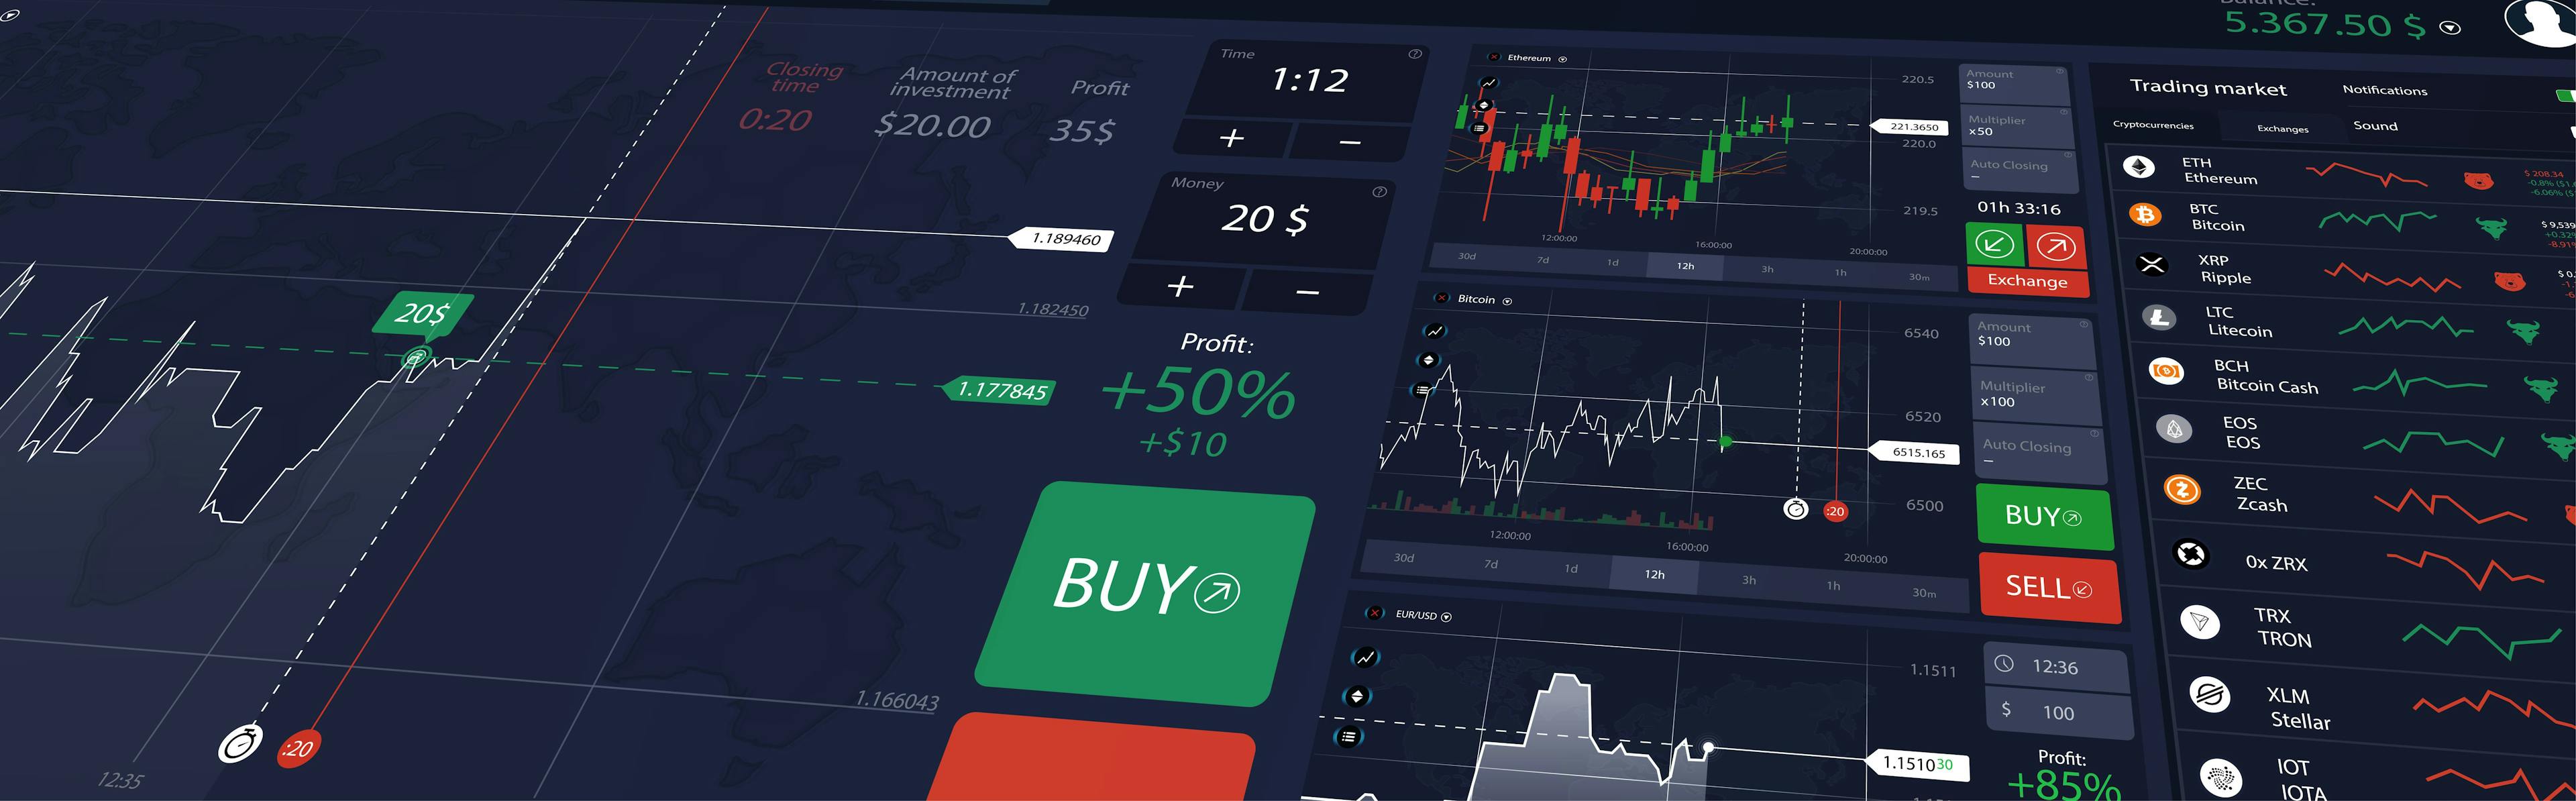 Illustration stock market or forex trading platform with dashboard interface.  Economic trends and stock exchange. Vector illustration See Less | Image Credit: © SergeyBitos - stock.adobe.com.